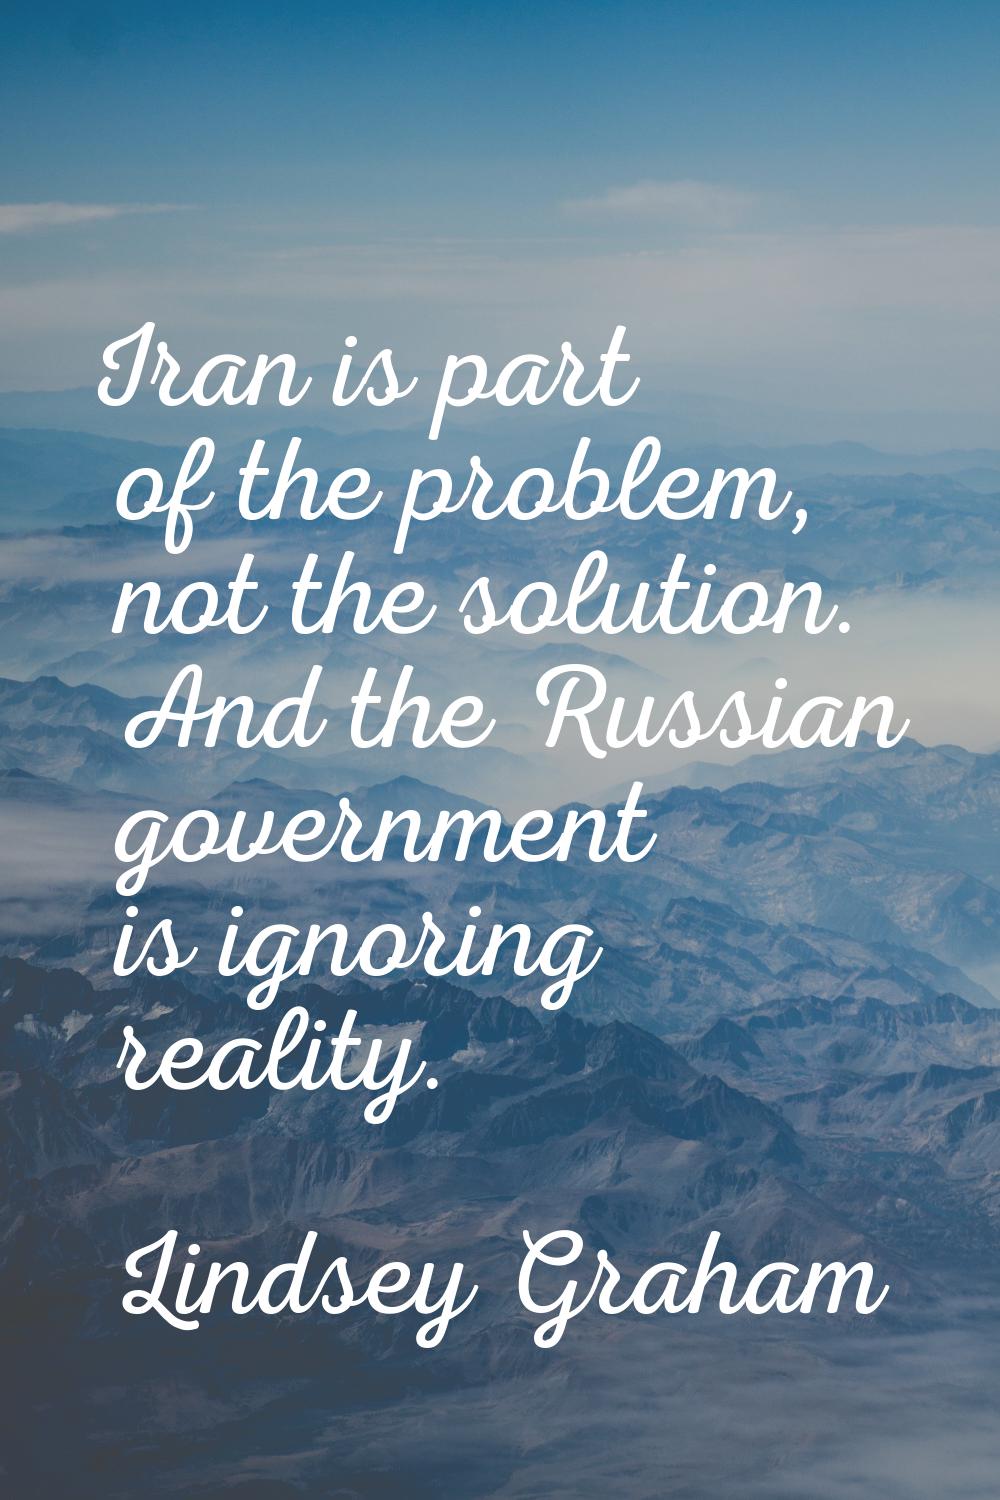 Iran is part of the problem, not the solution. And the Russian government is ignoring reality.